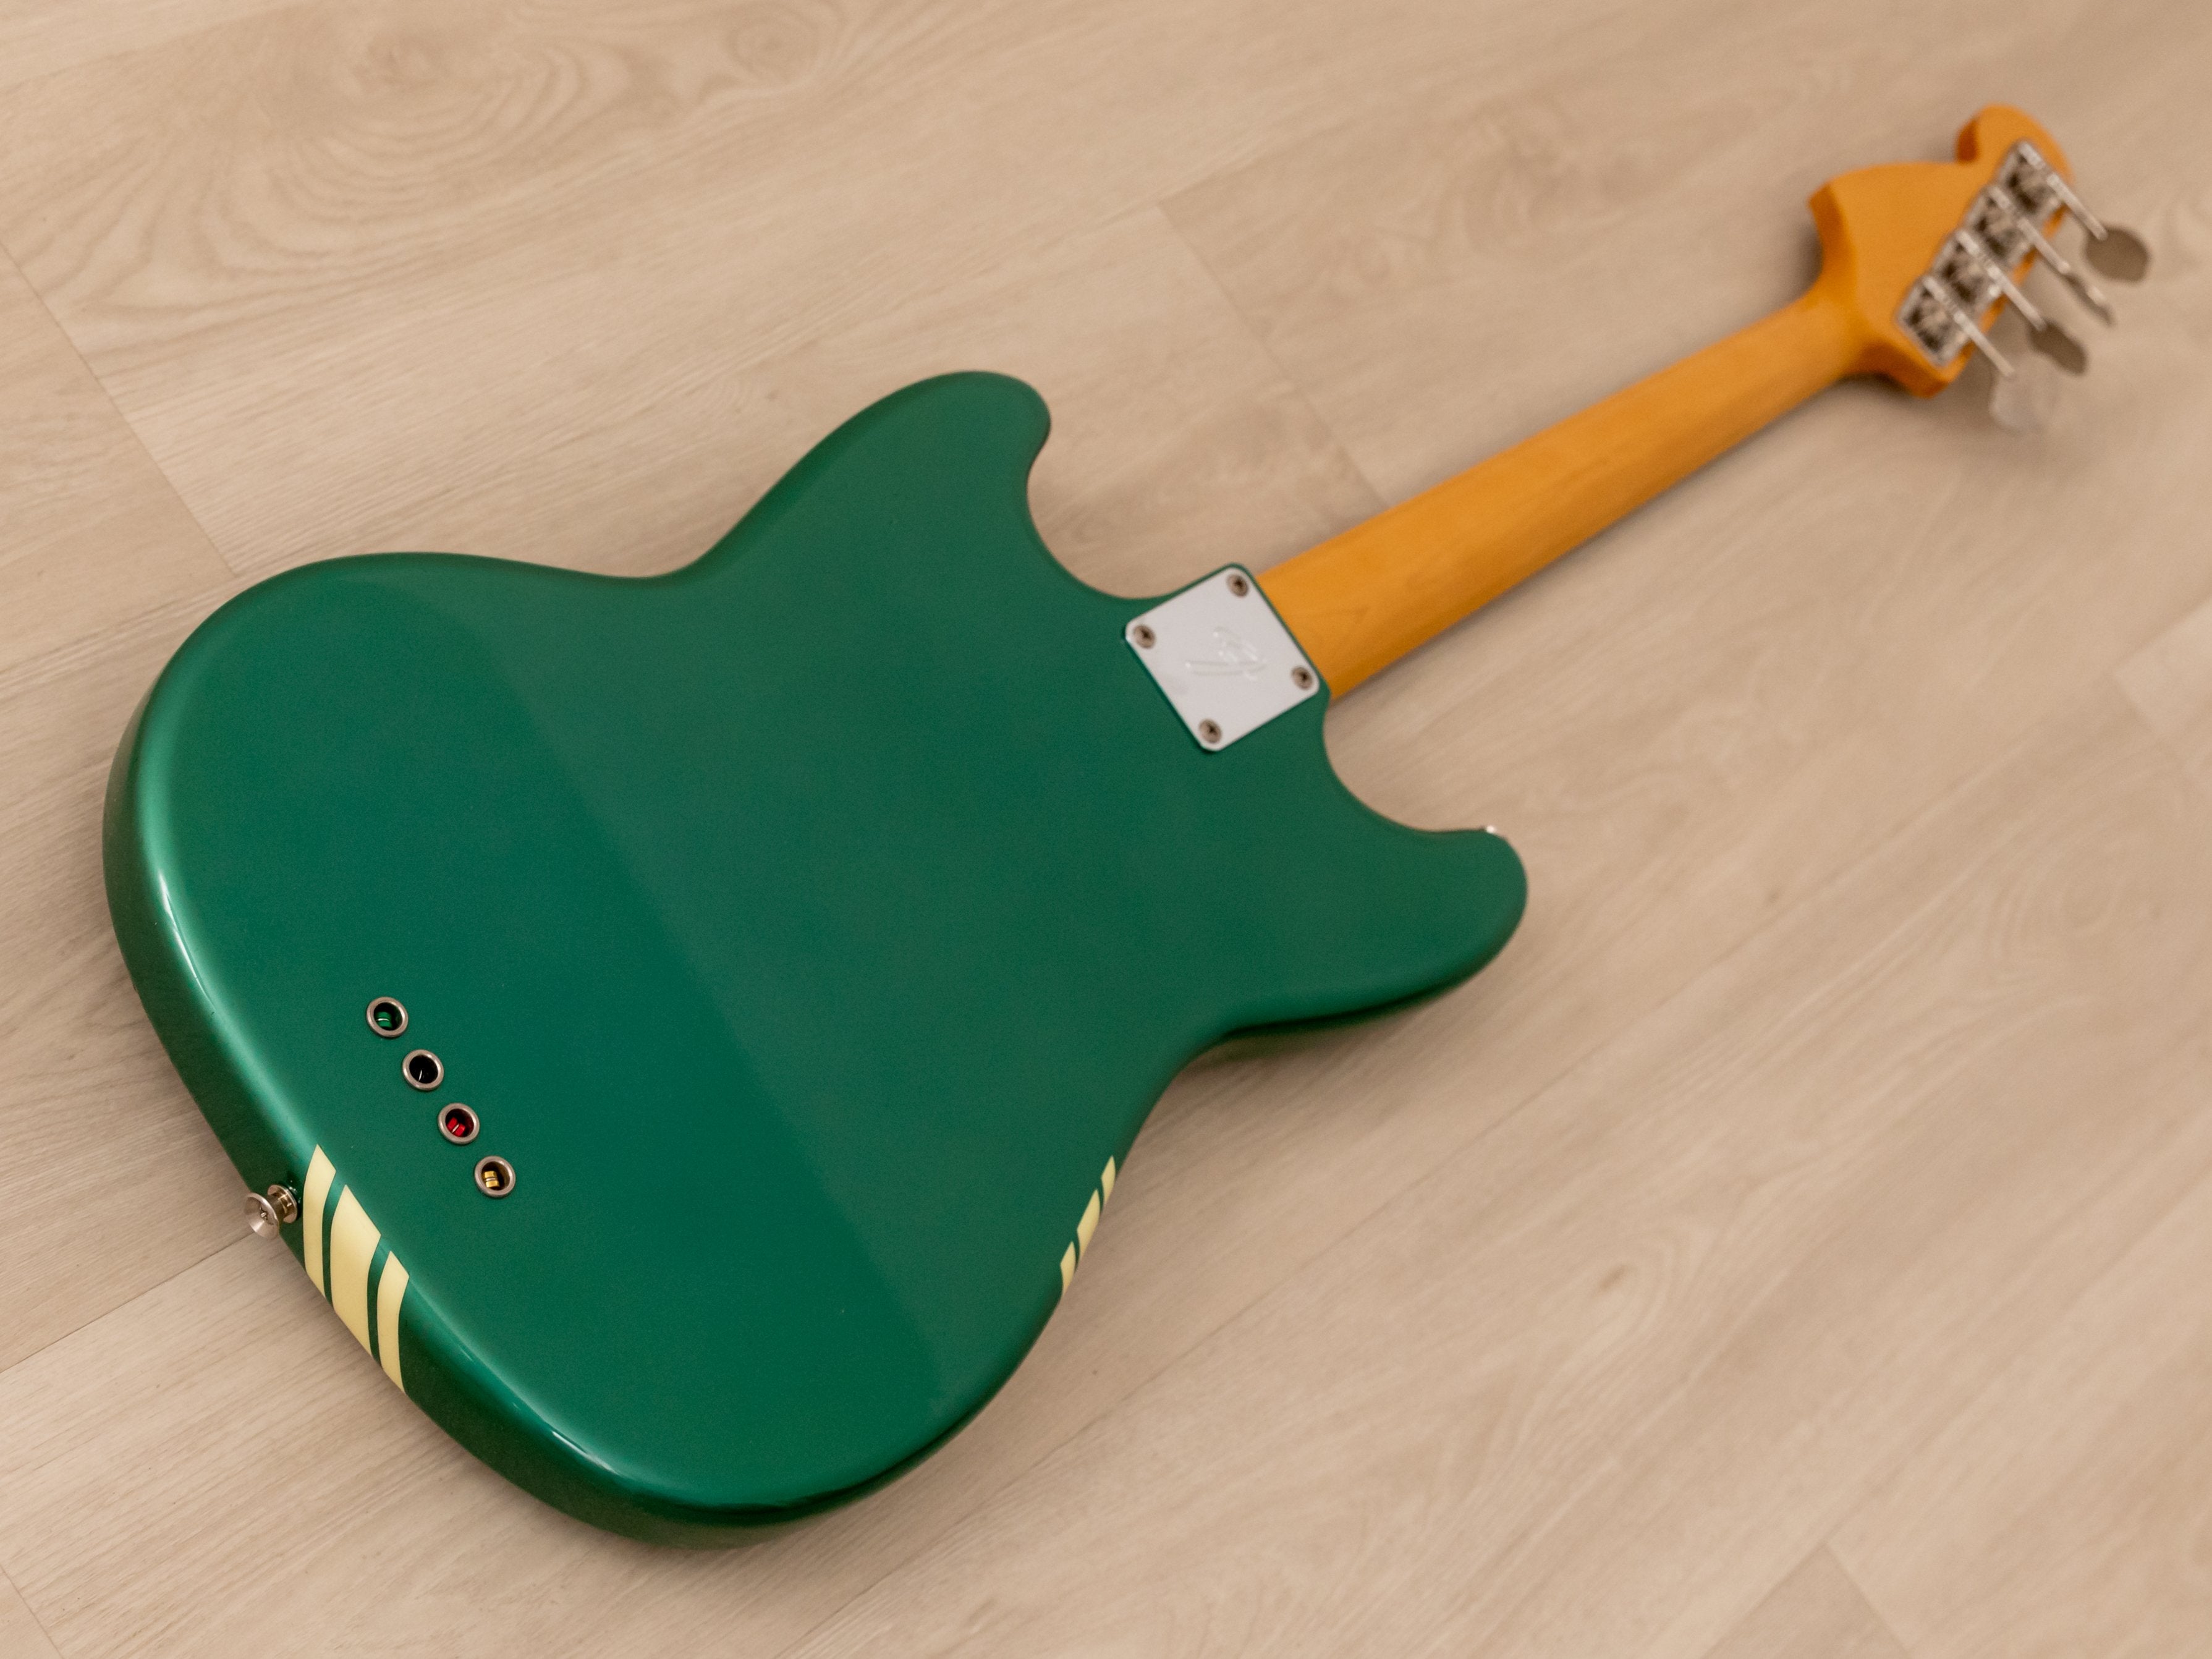 2005 Fender Competition Mustang Bass '69 Vintage Reissue MB-SD/CO Ocean Turquoise, Japan CIJ